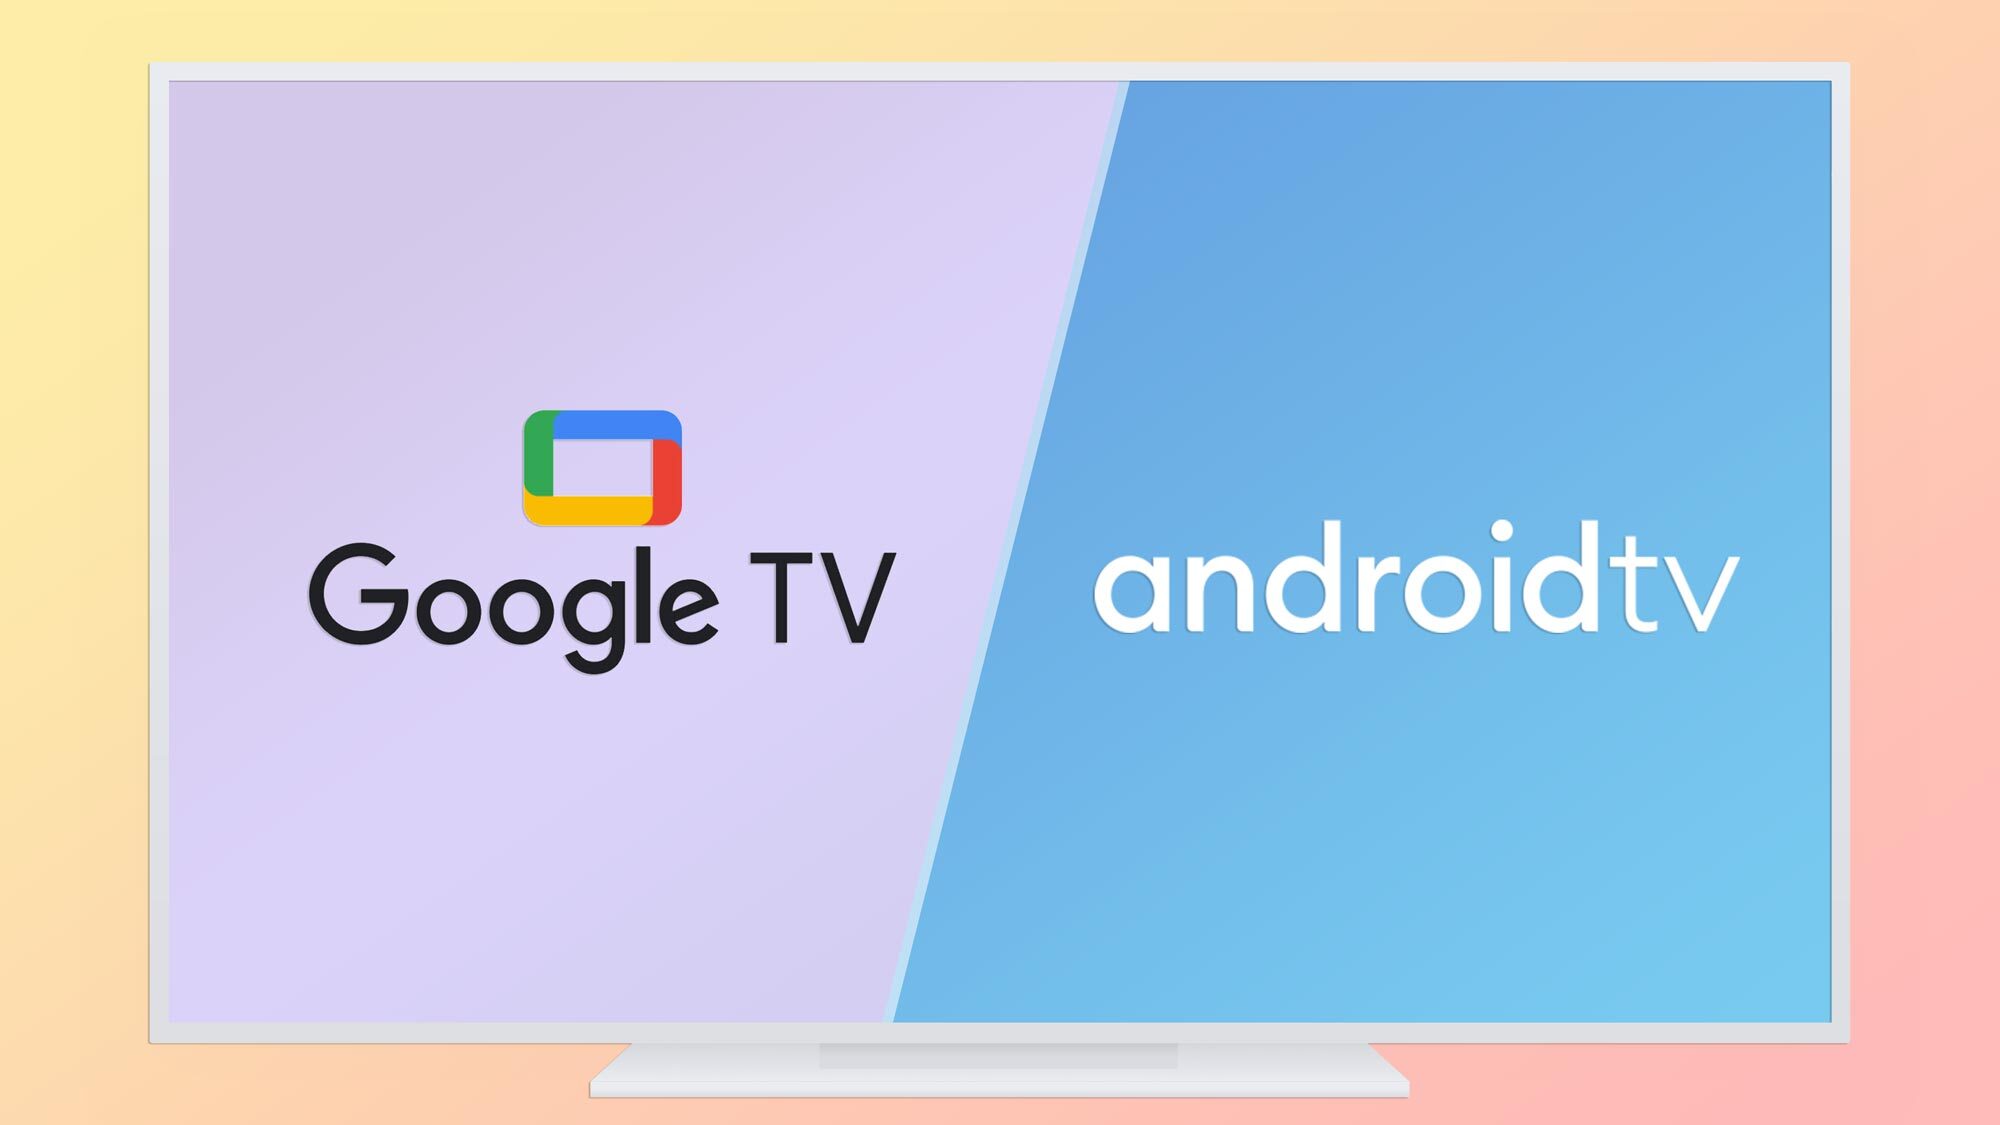 Google vs. Android What's the difference? | Guide